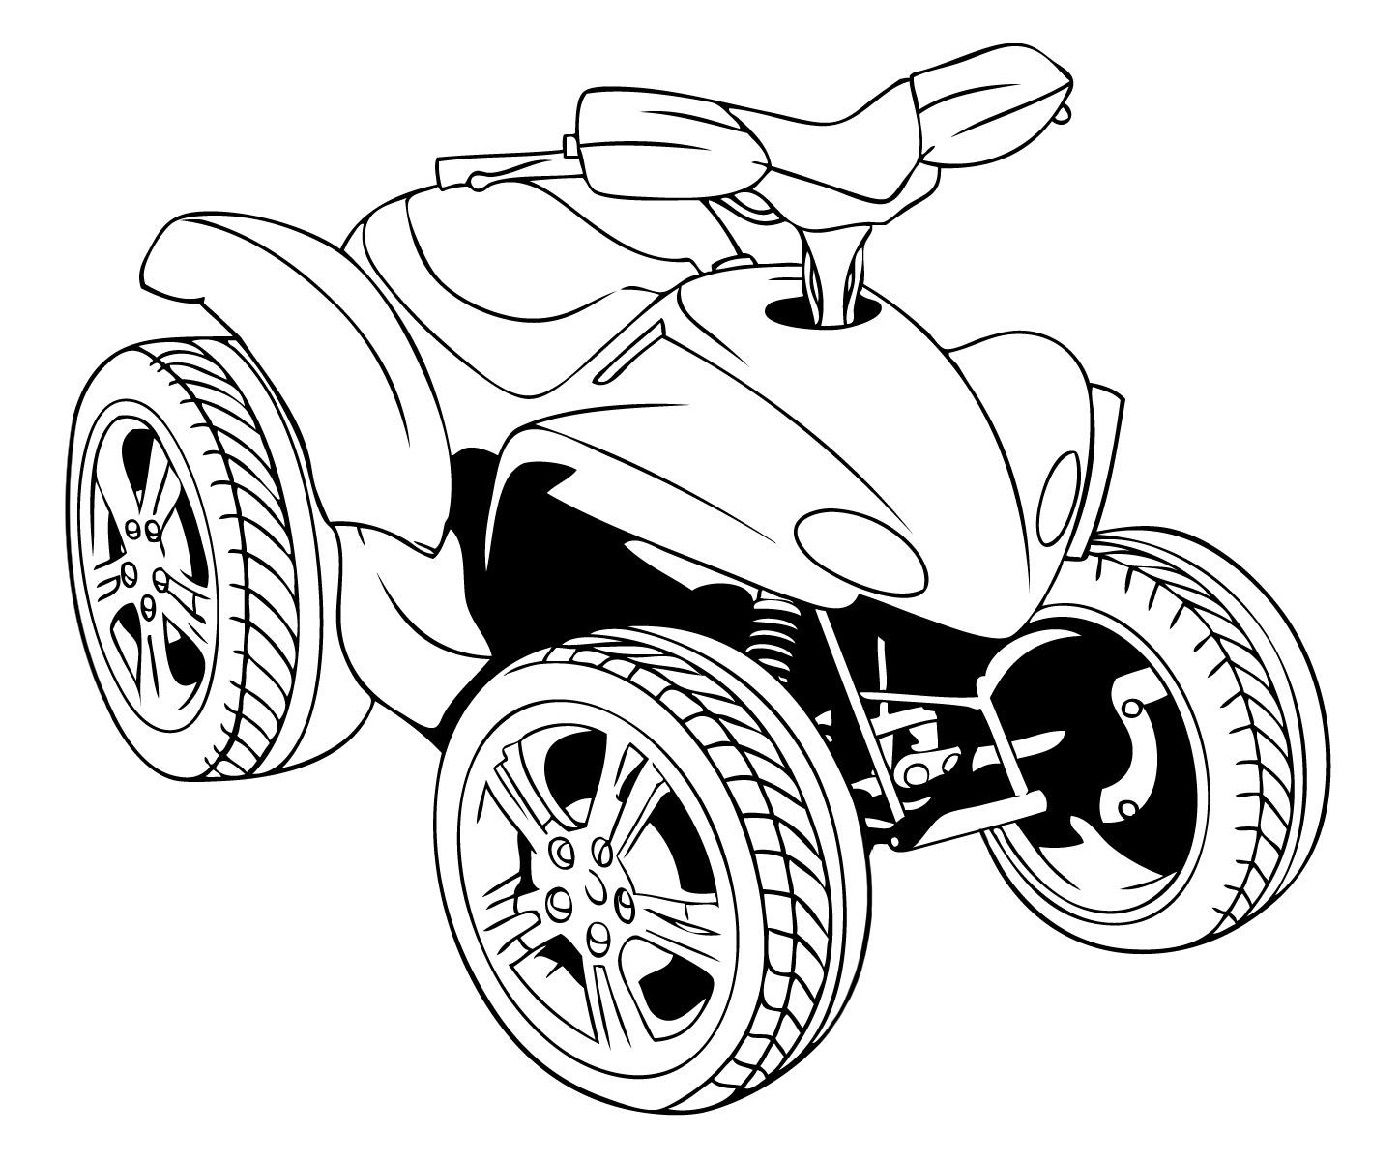 Four Wheeler Coloring Pages | K5 Worksheets | Coloring pages, Halloween coloring  pages, Truck coloring pages